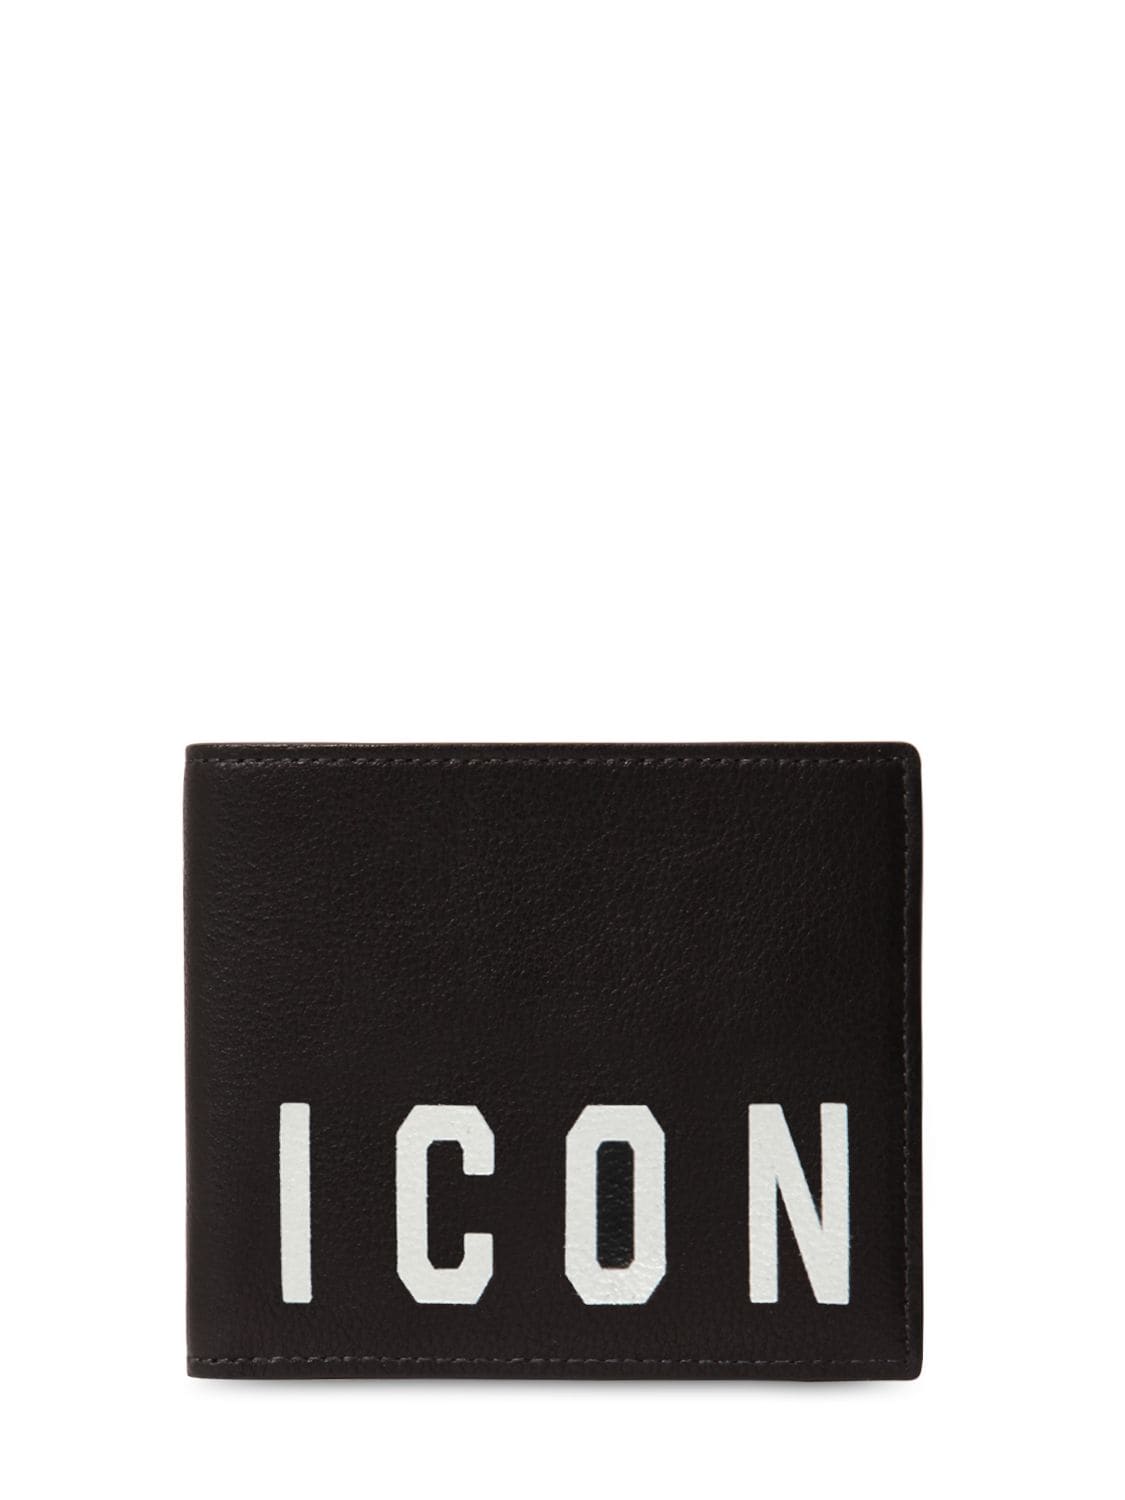 DSQUARED2 ICON PRINT CLASSIC LEATHER WALLET,70IG7F043-TTA2MW2